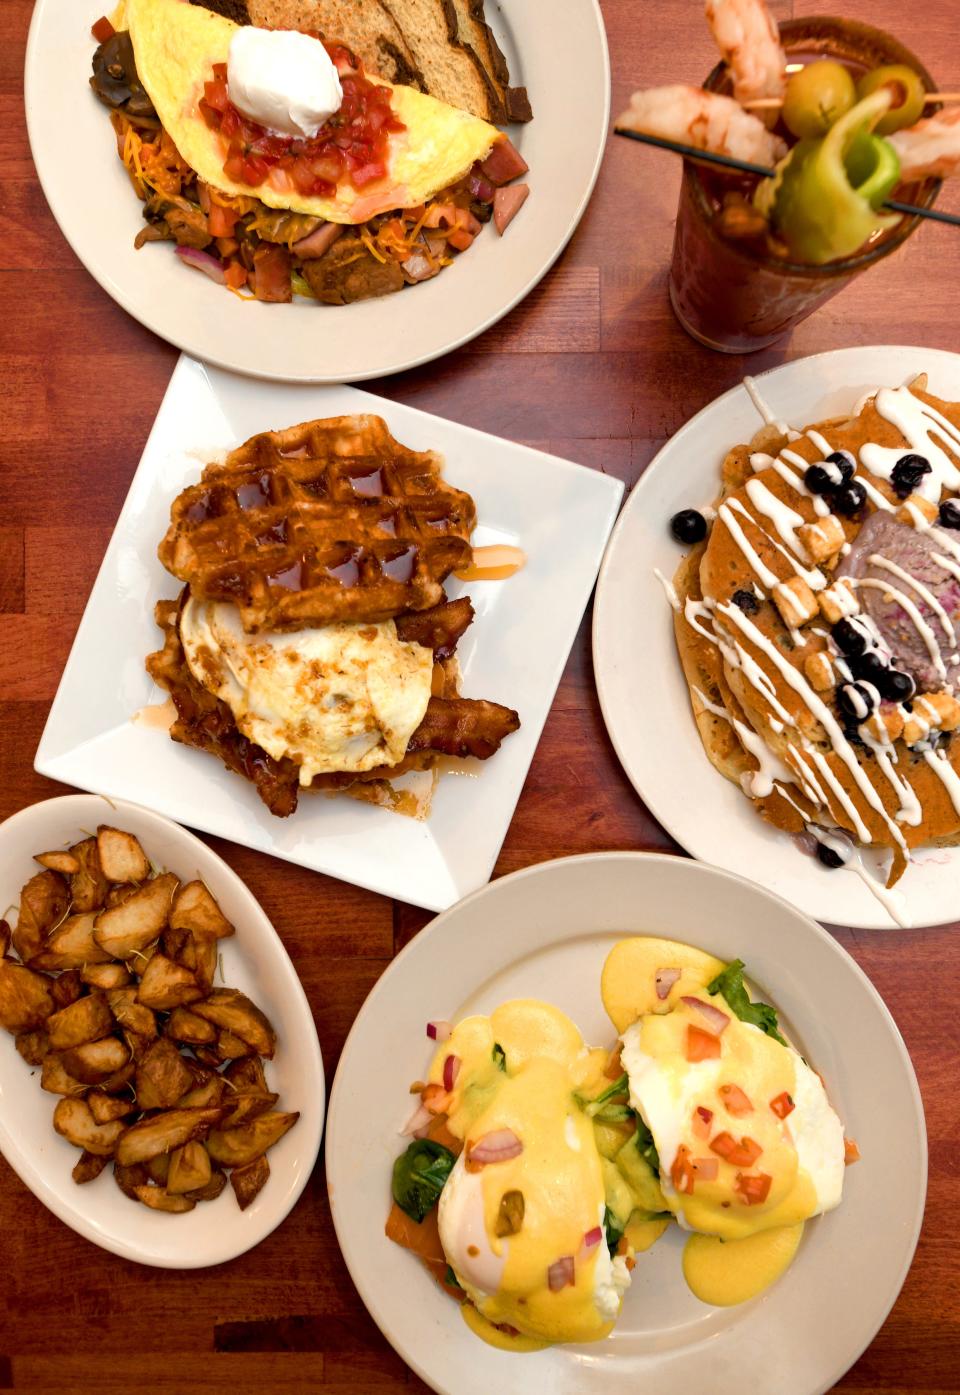 Samantha's Restaurant on Portage is known for offering a large breakfast menu.